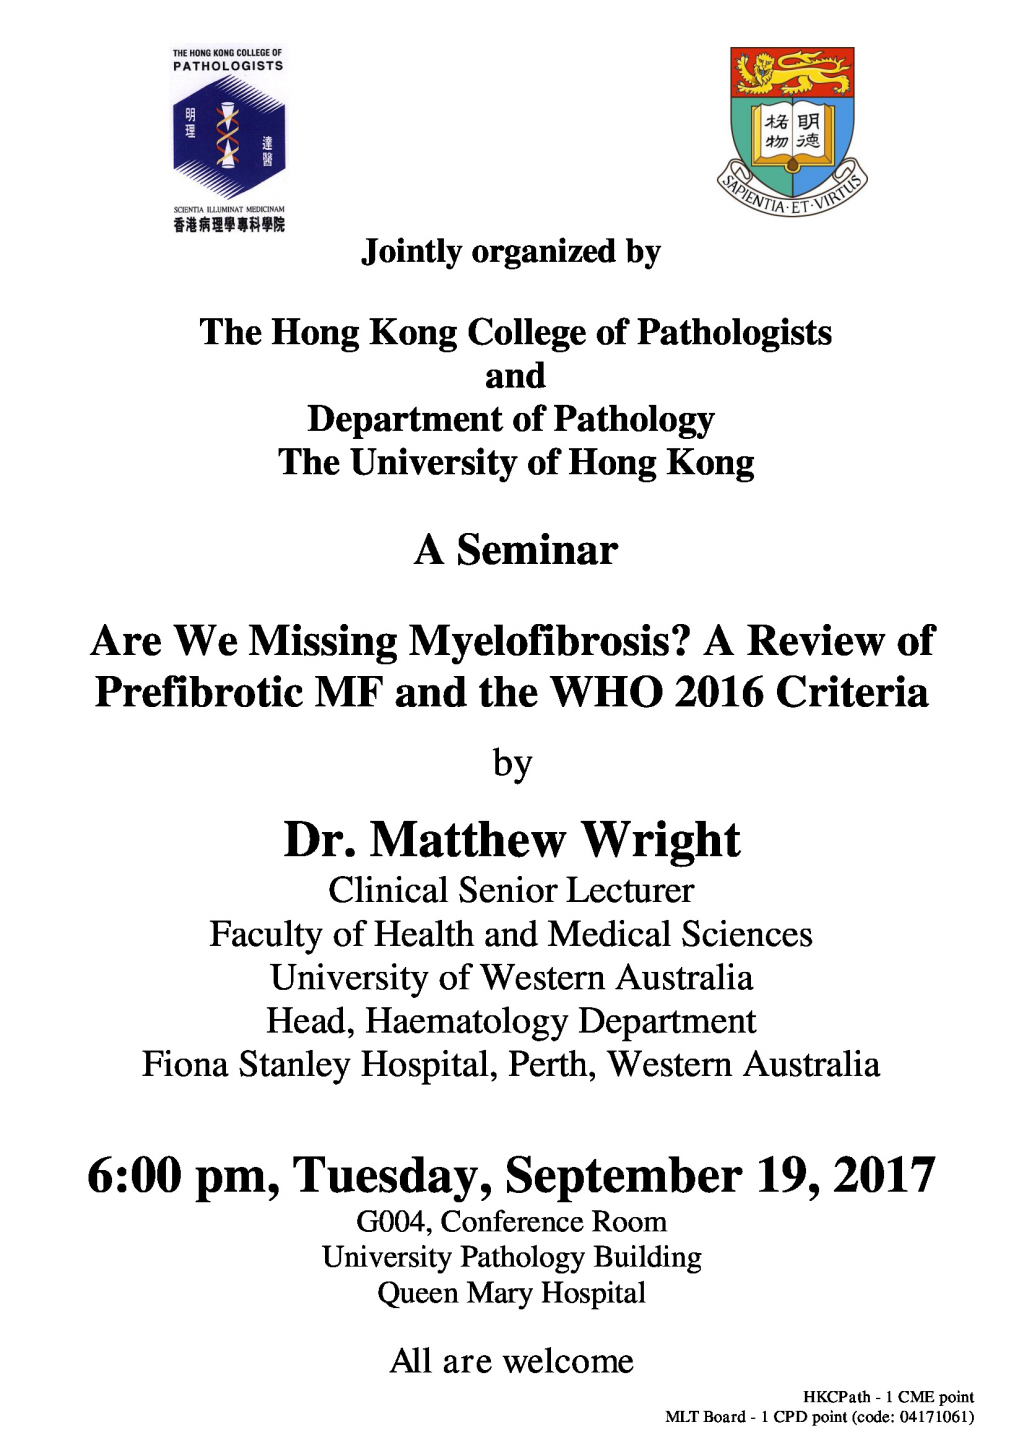 A Seminar on Are We Missing Myelofibrosis? A Review of Prefibrotic MF and the WHO 2016 Criteria by Dr. Matthew Wright on Sep 19, 2017 (6 pm)